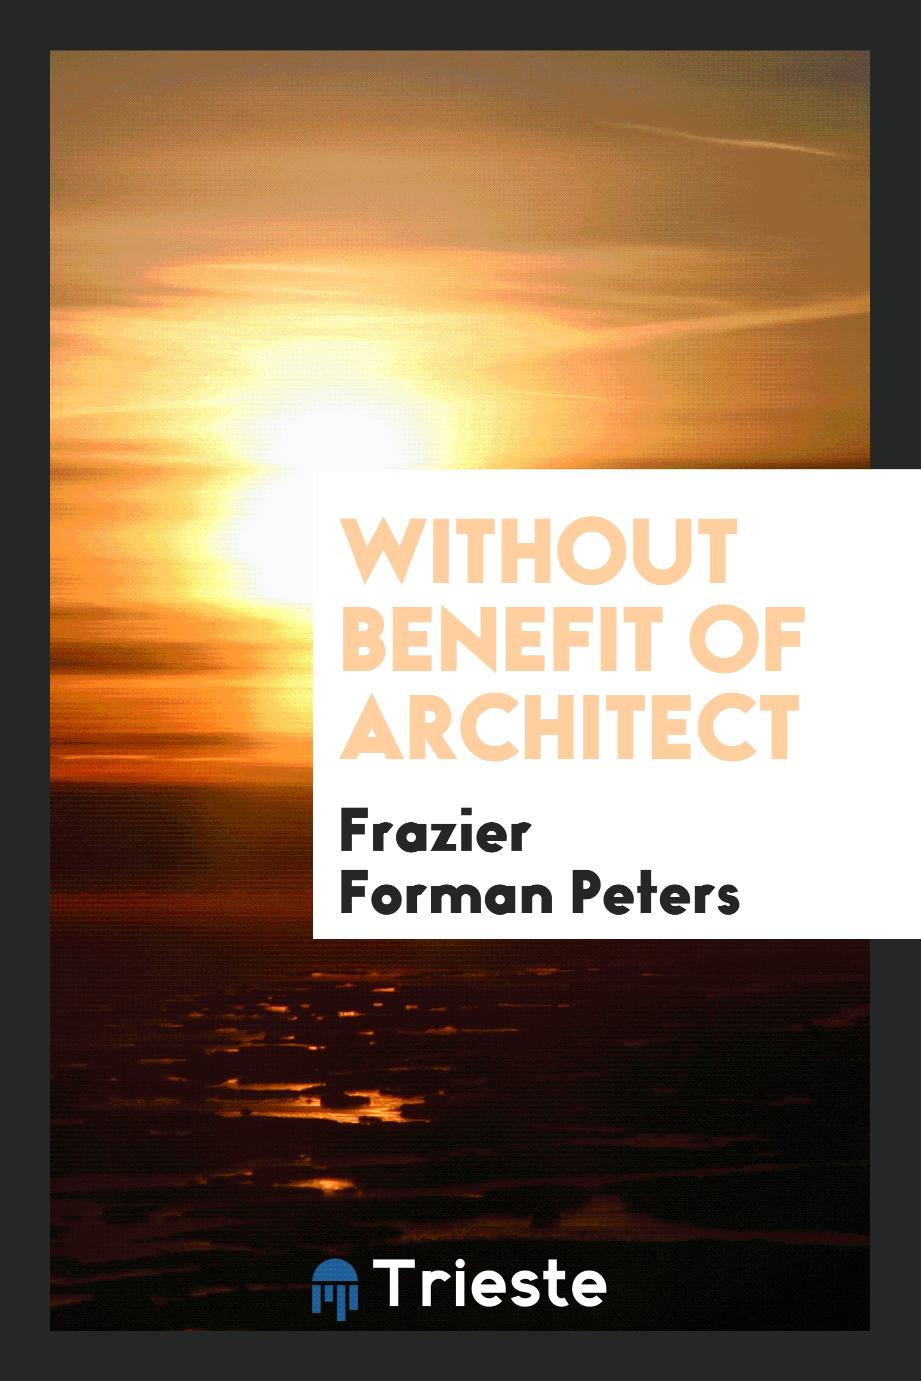 Without benefit of architect